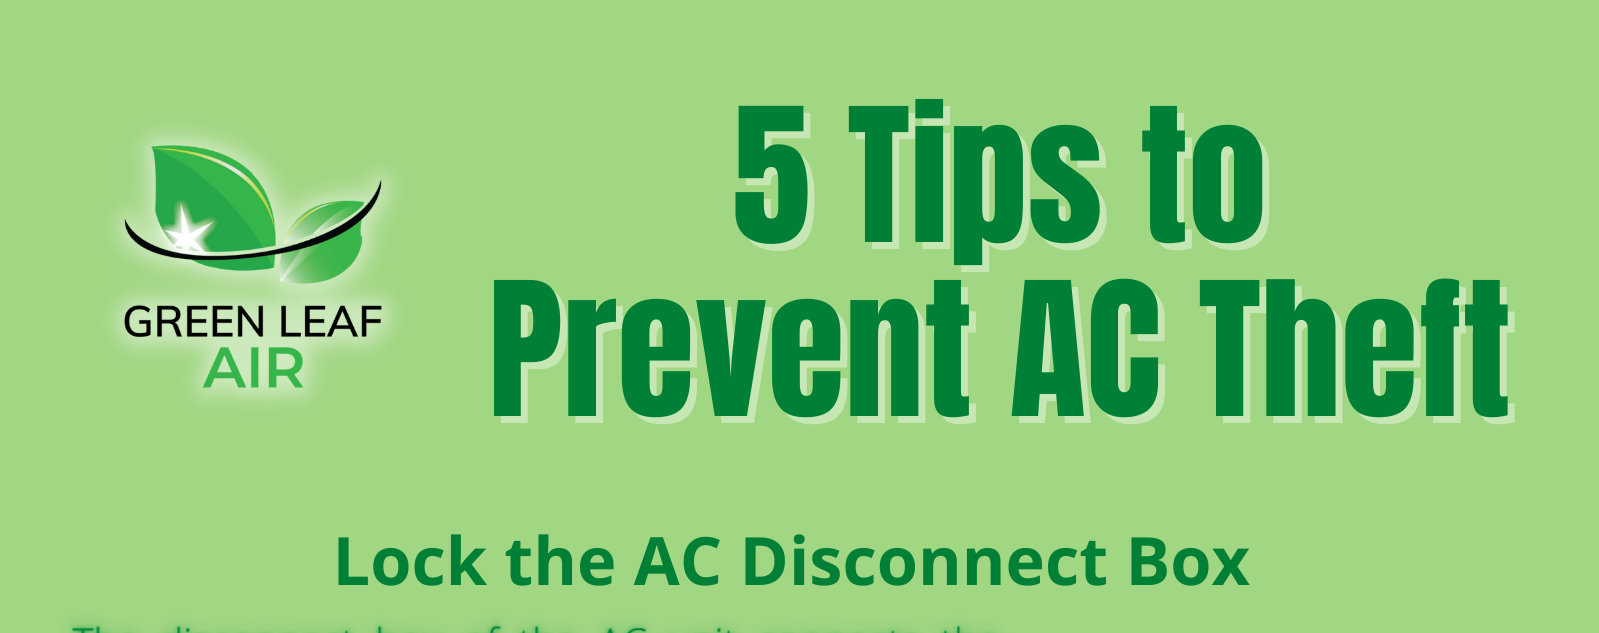 5 Tips to Prevent AC Theft